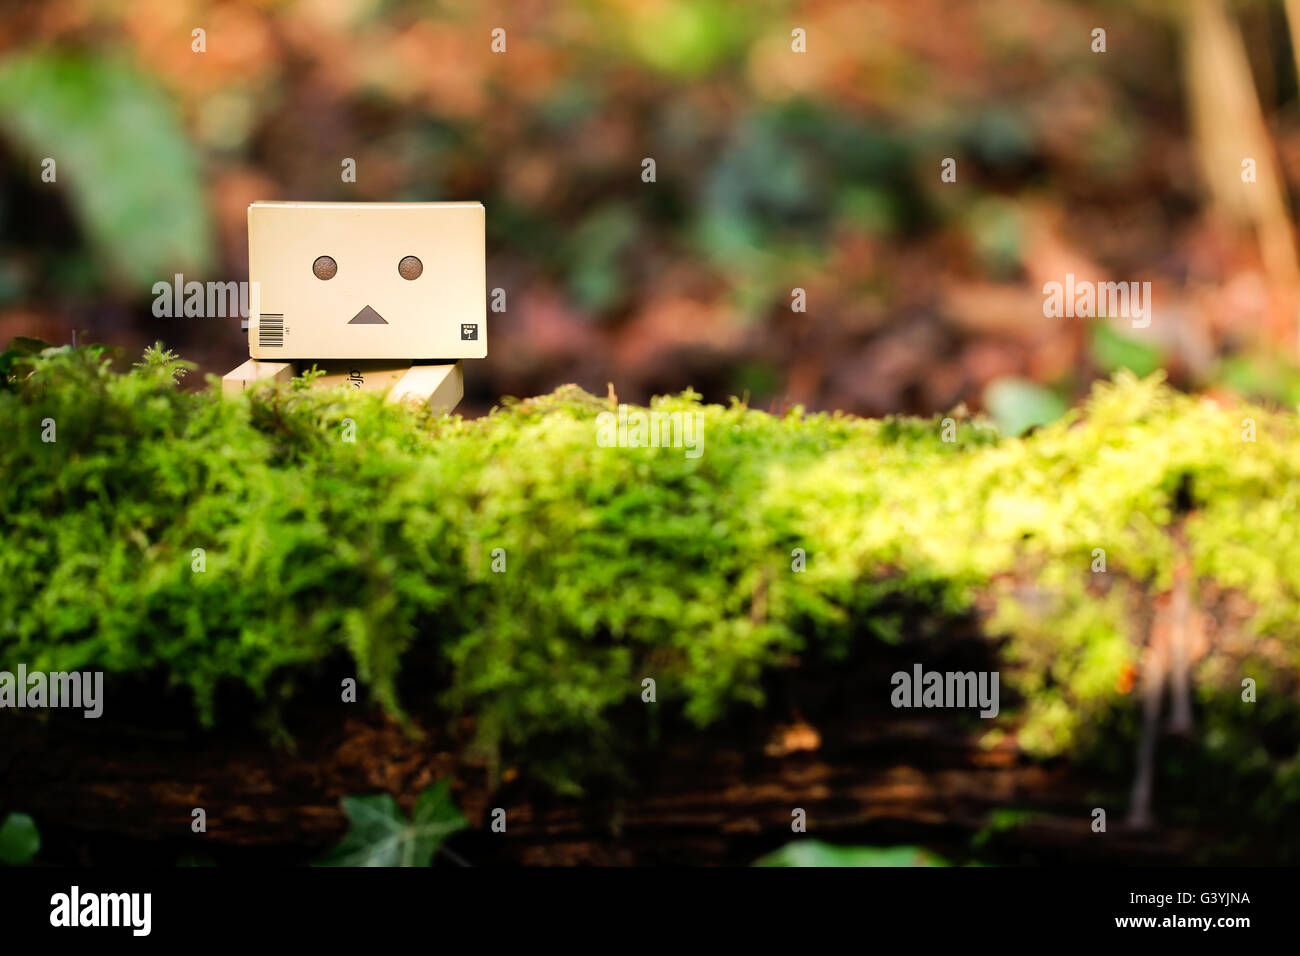 A Danbo Danboard fictional Robot Character hiding amongst undergrowth and lichen in woodland Stock Photo